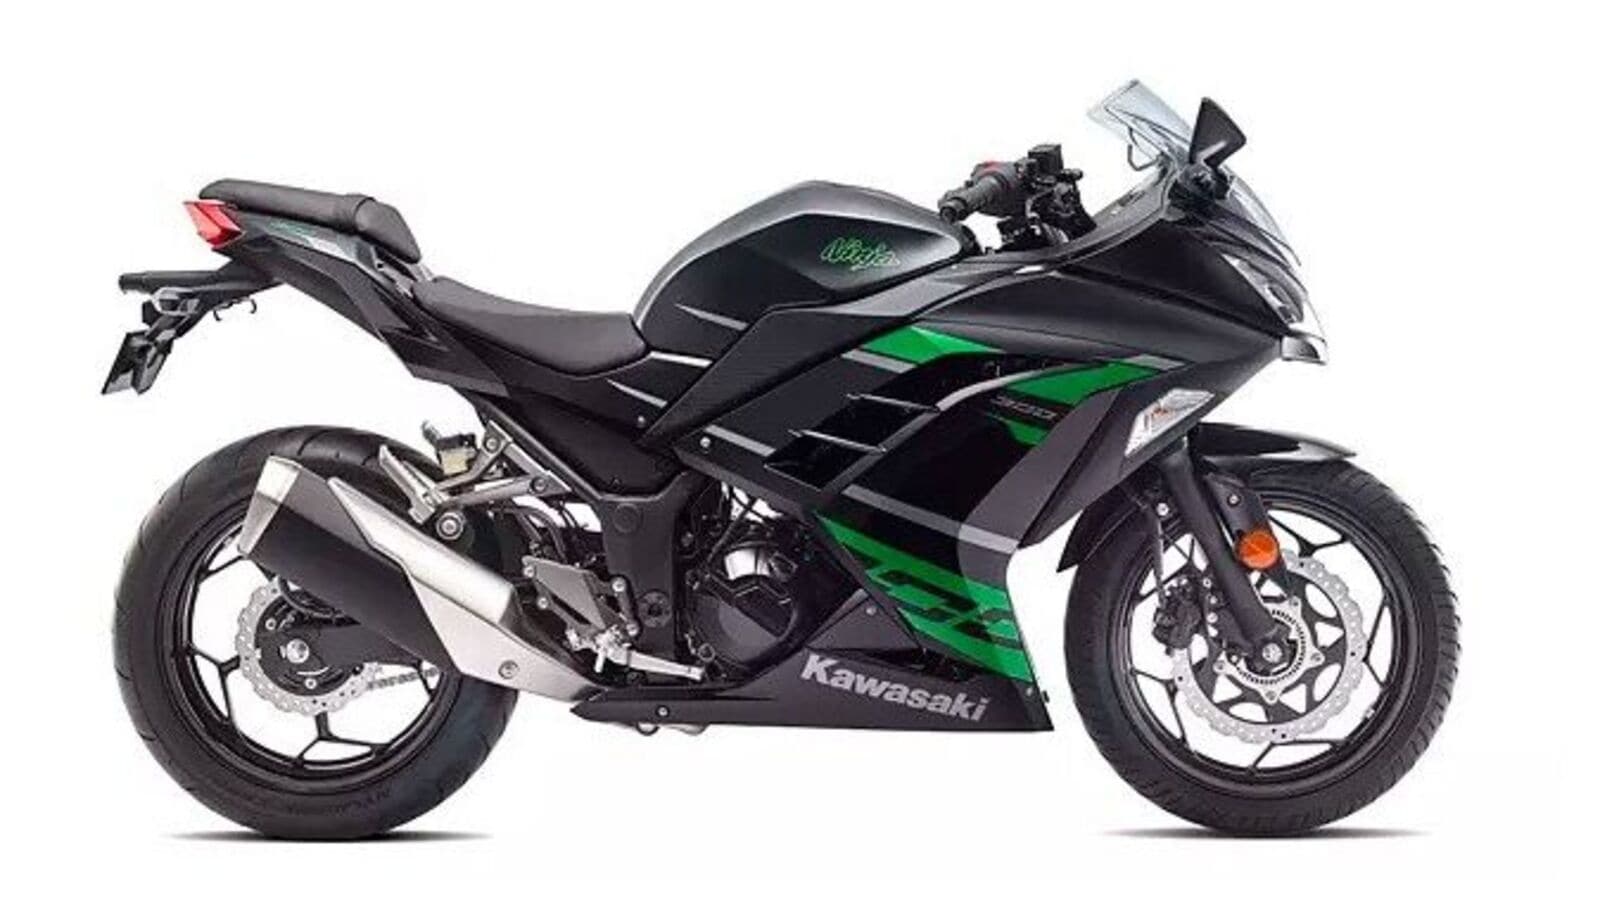 2022 Kawasaki Ninja 300 launched in India in new colours | HT Auto